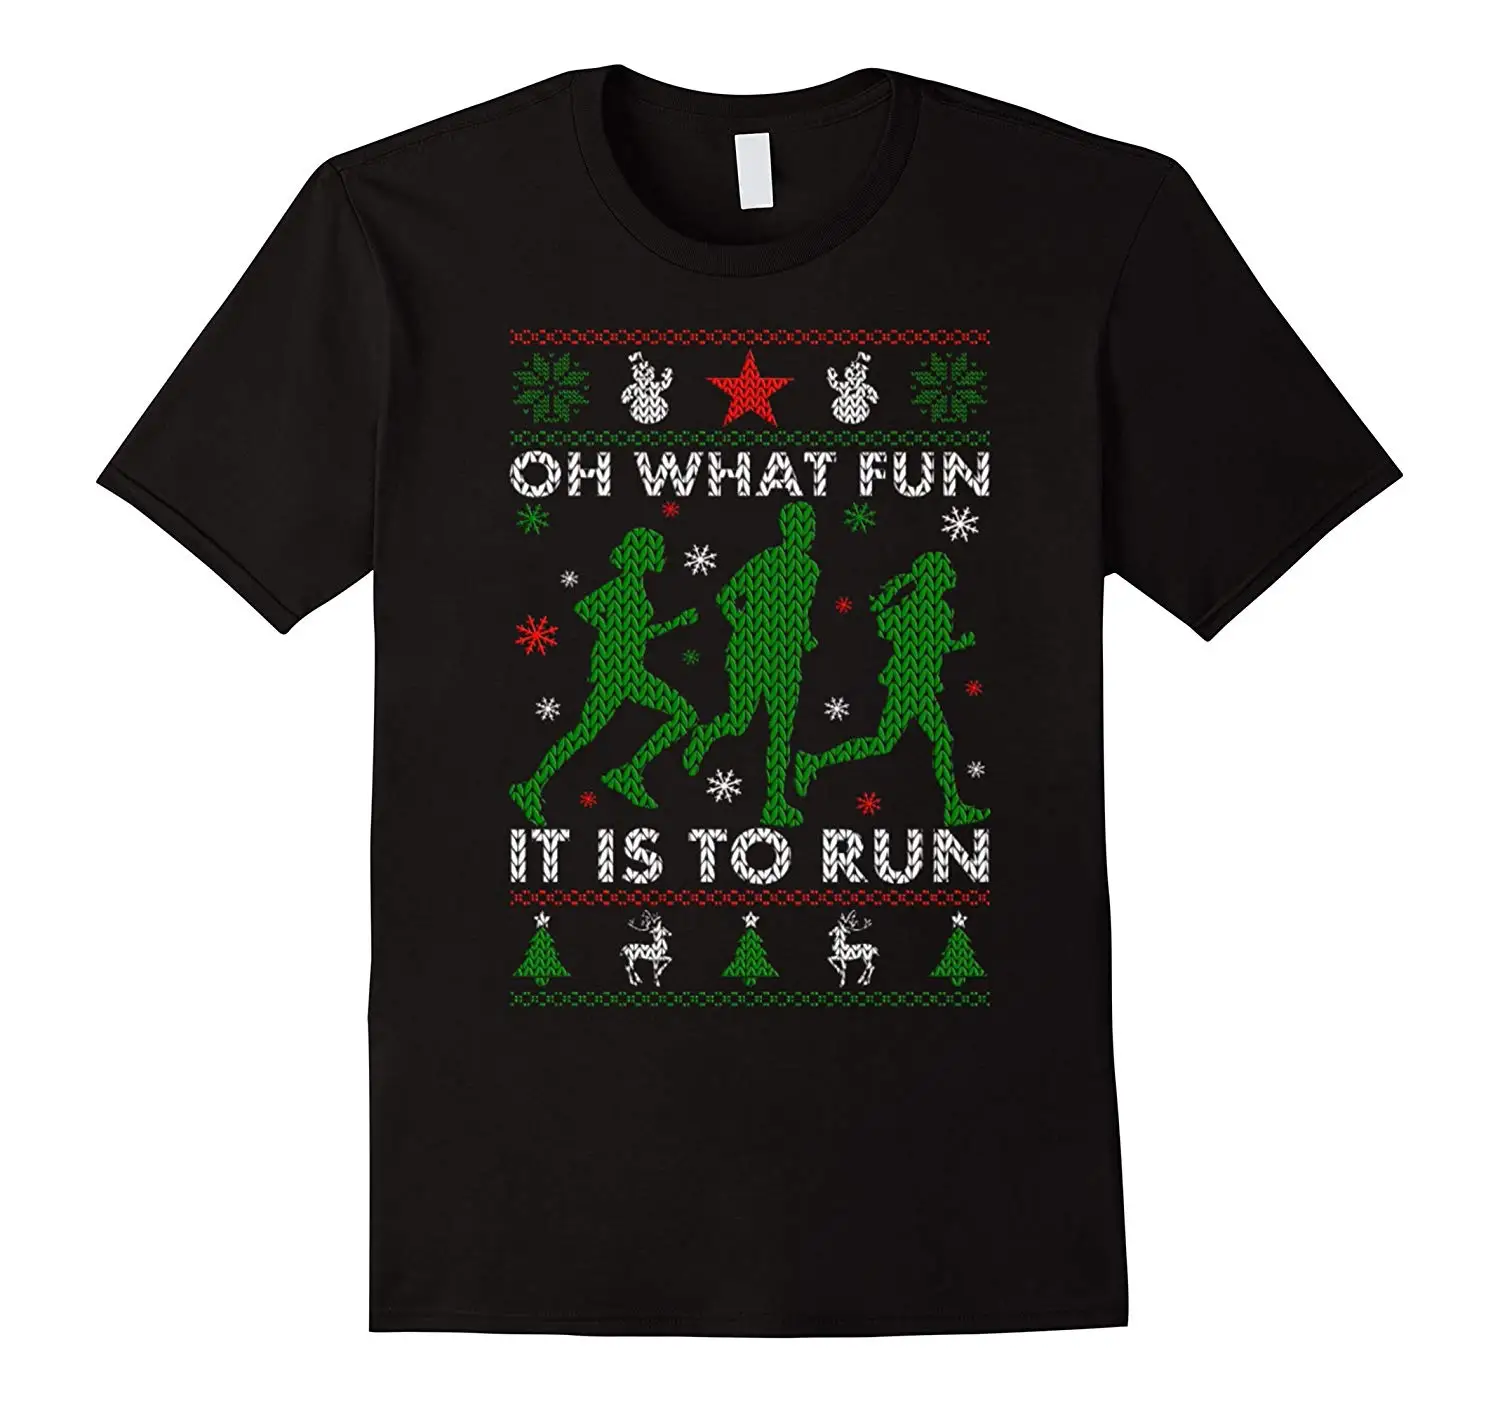 

Oh What Fun It Is To Run. Funny Ugly Sweater Merry Christmas T-Shirt. Summer Cotton Short Sleeve O-Neck Men's T Shirt New S-3XL